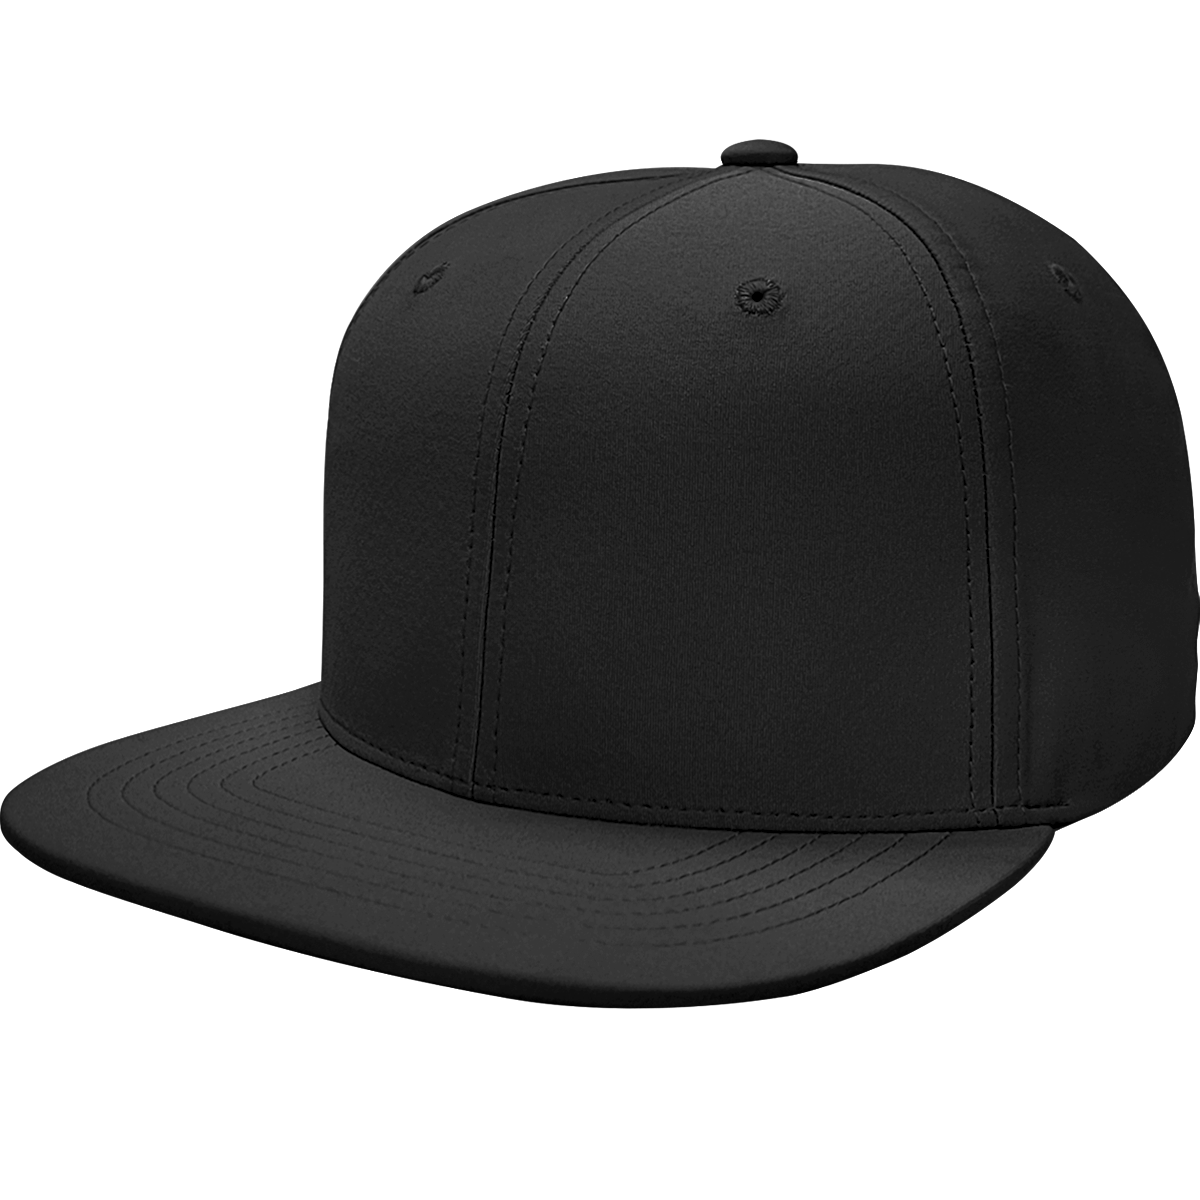 6 Panel Structured Performance Cap with Flat Bill- PR20